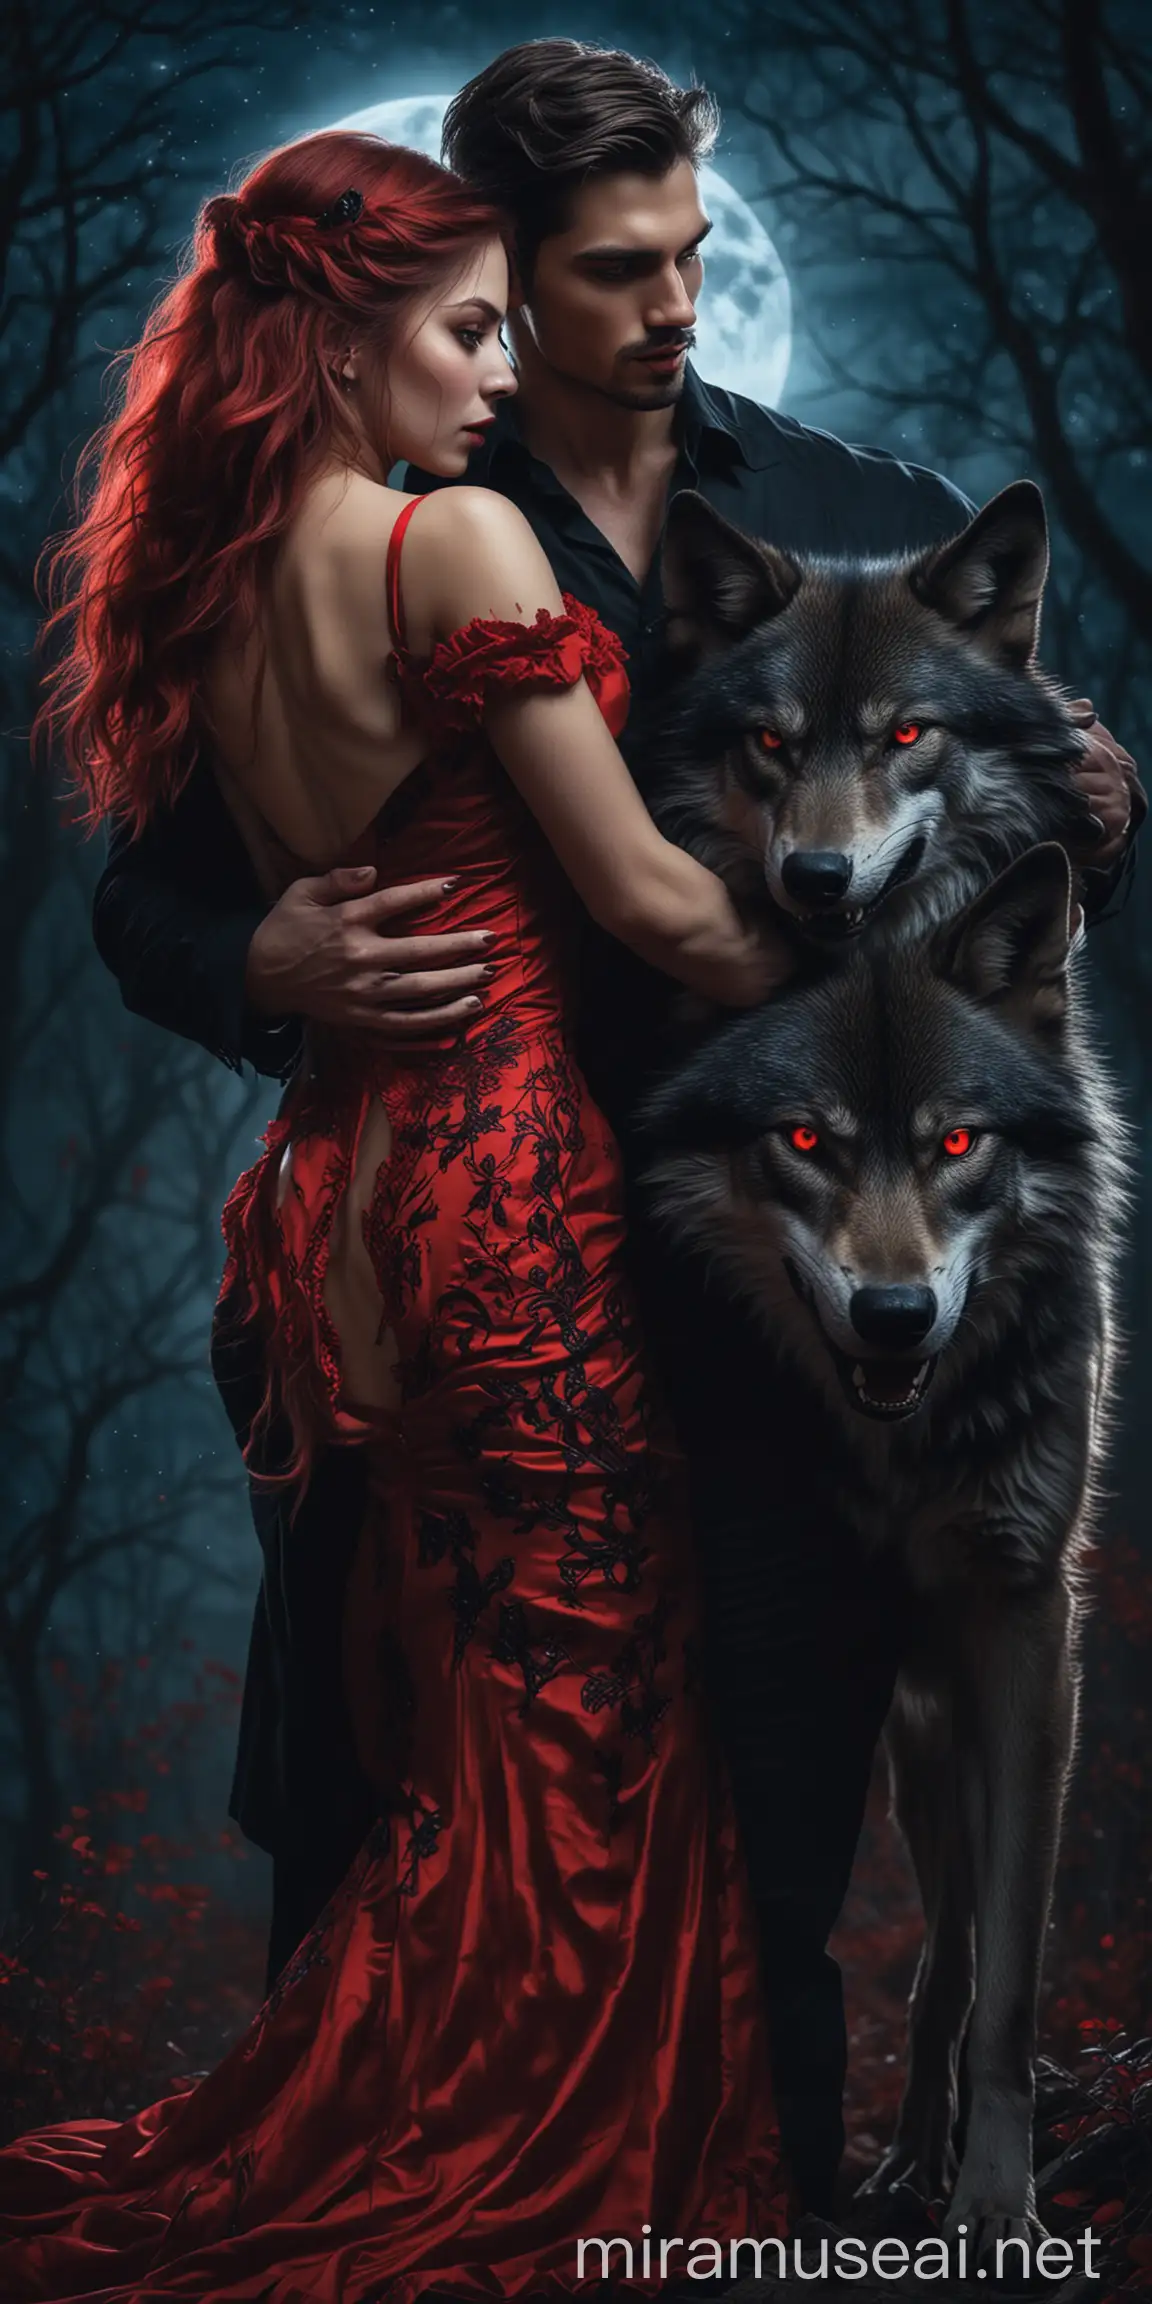 Romantic Vampire Couple Embracing Under Blue Moonlight with Wolf Companion